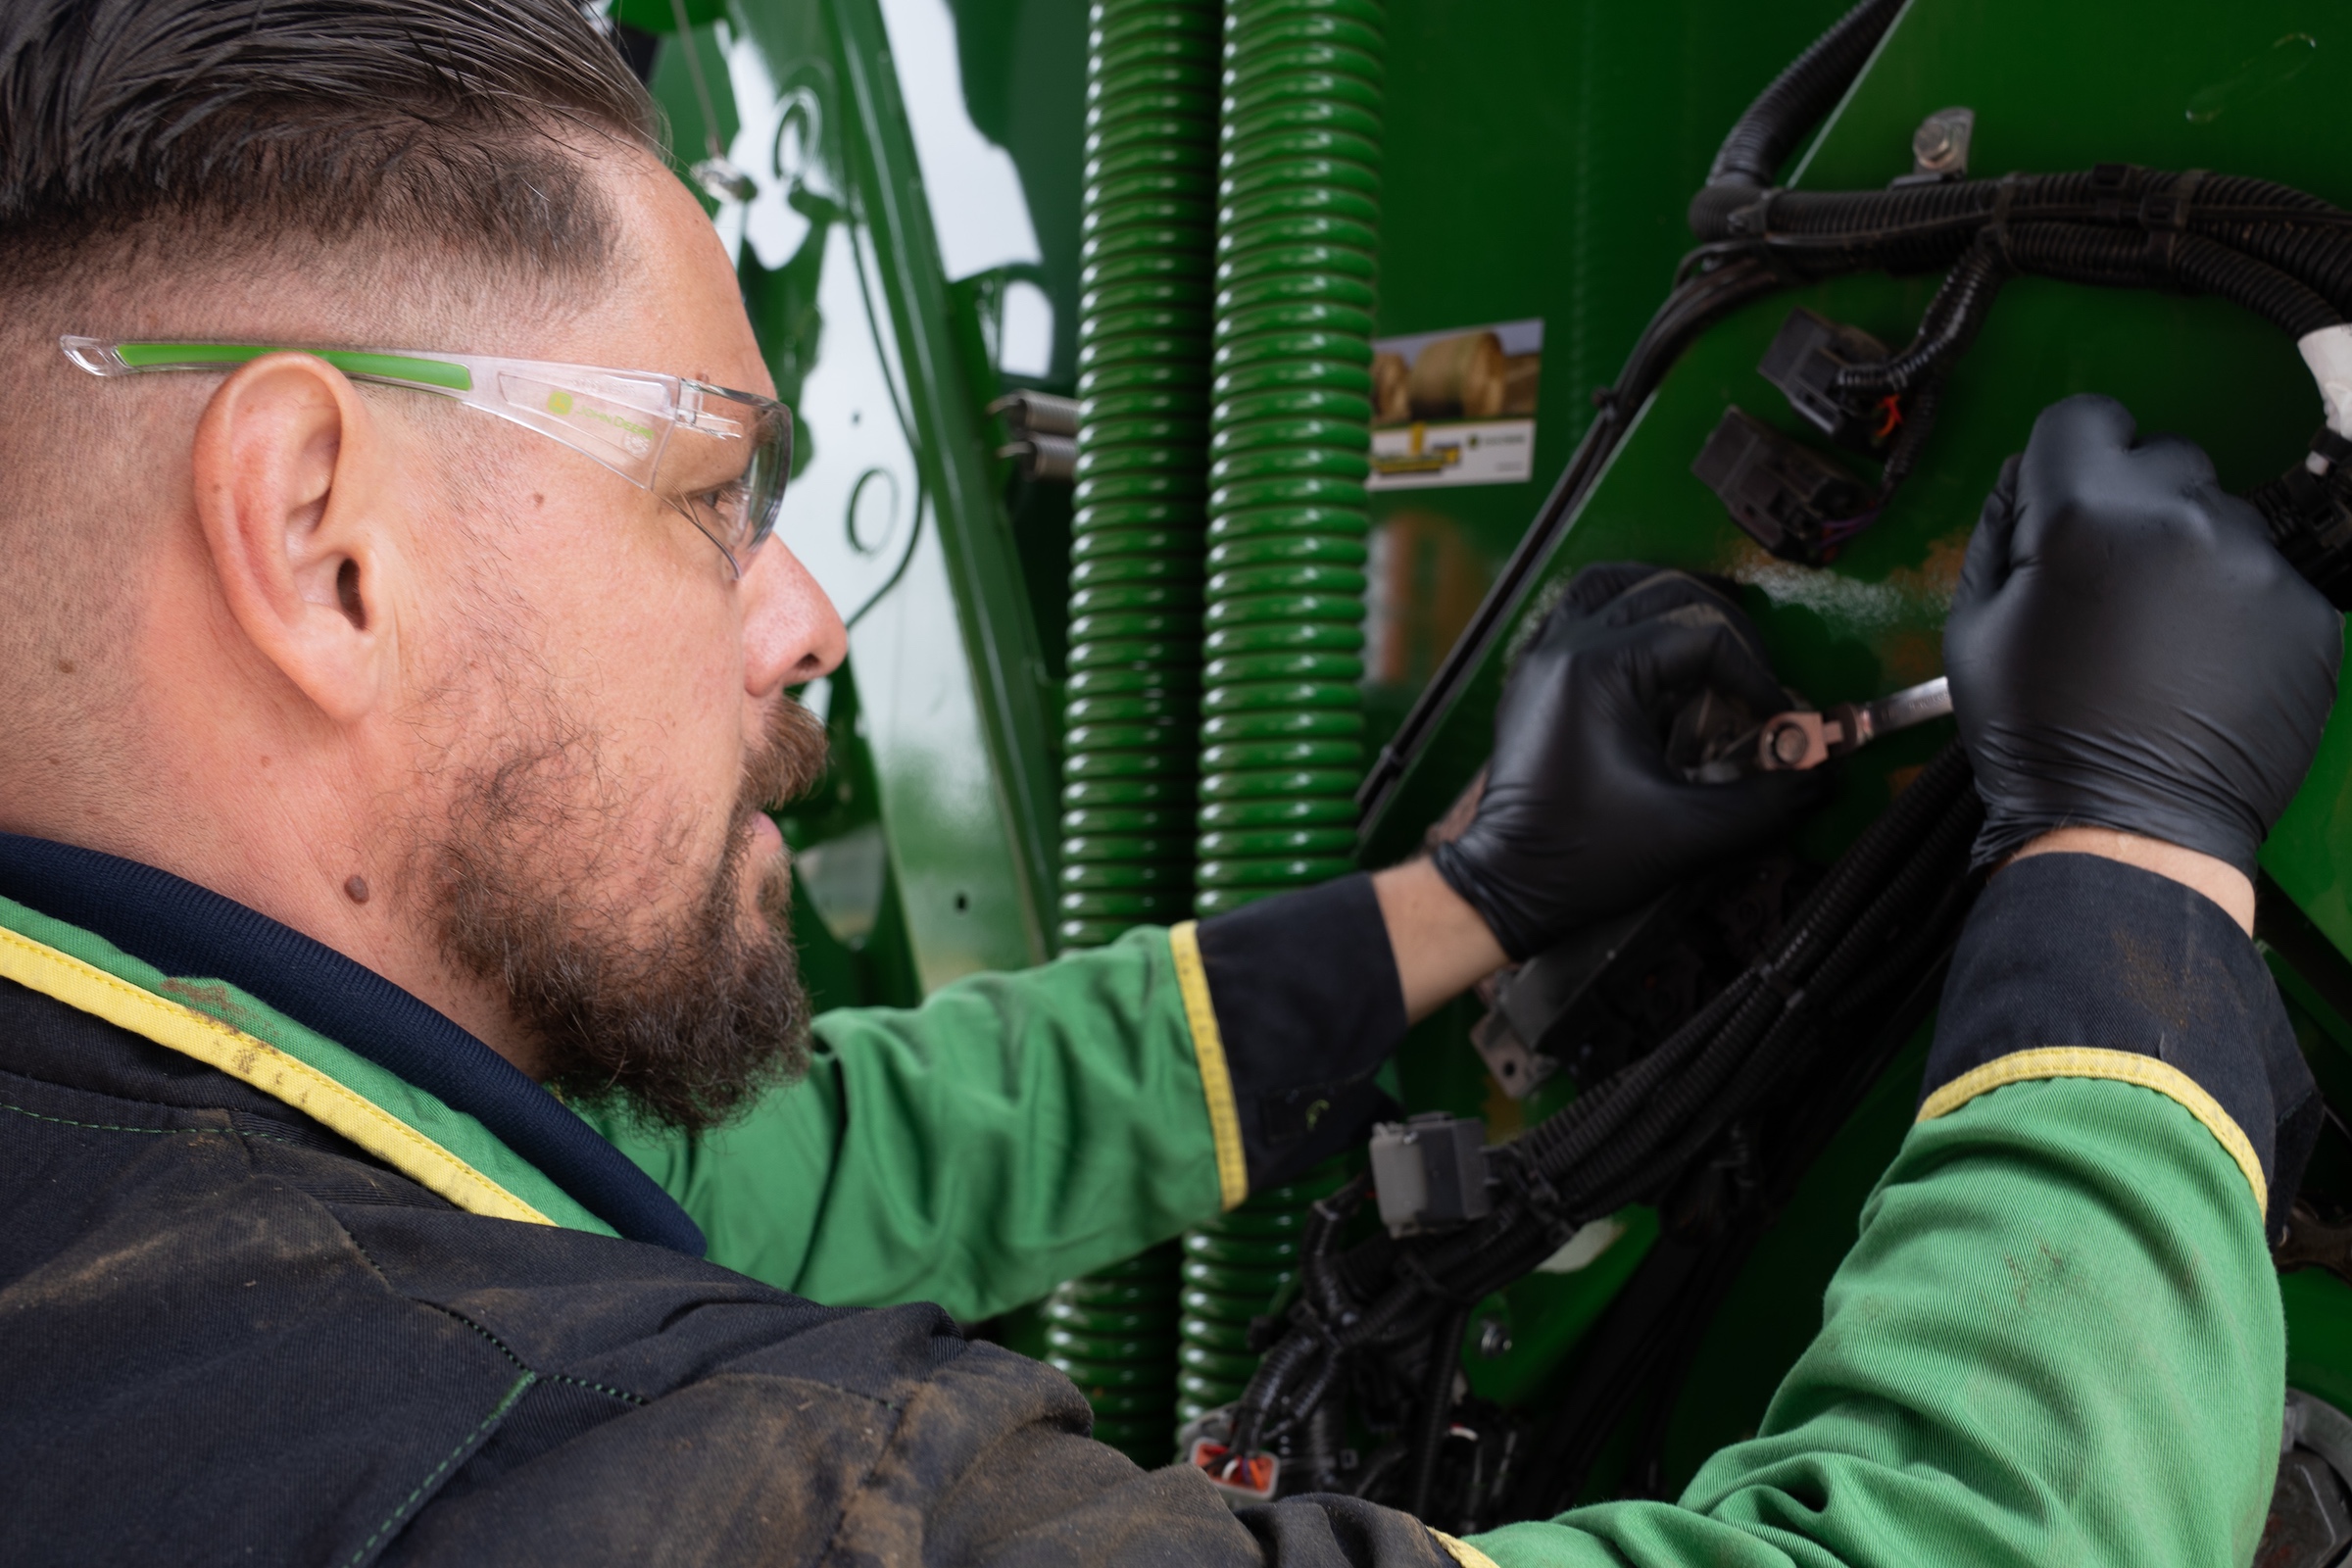 John Deere announces online careers event targeted at military service leavers